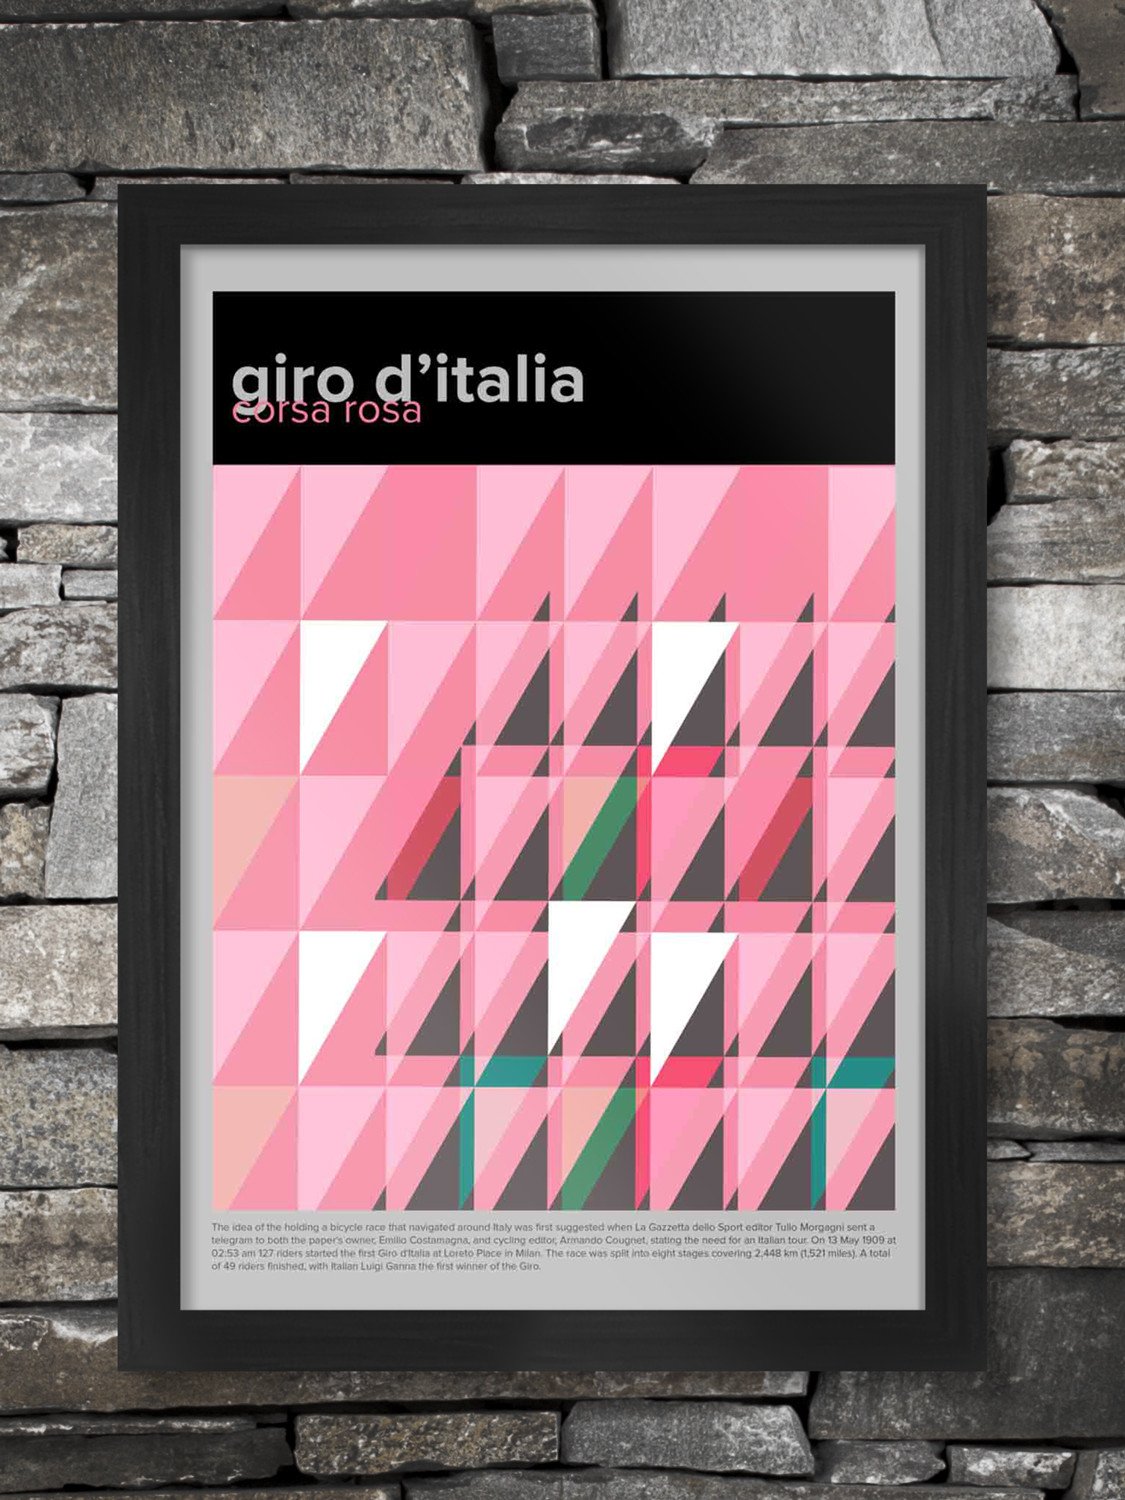 The geometric and modernist styled print celebrates the demands of the race in particular the imposing mountains and great climbs such as the Zoncolan, Stelvio, Finestre and the Blockhaus